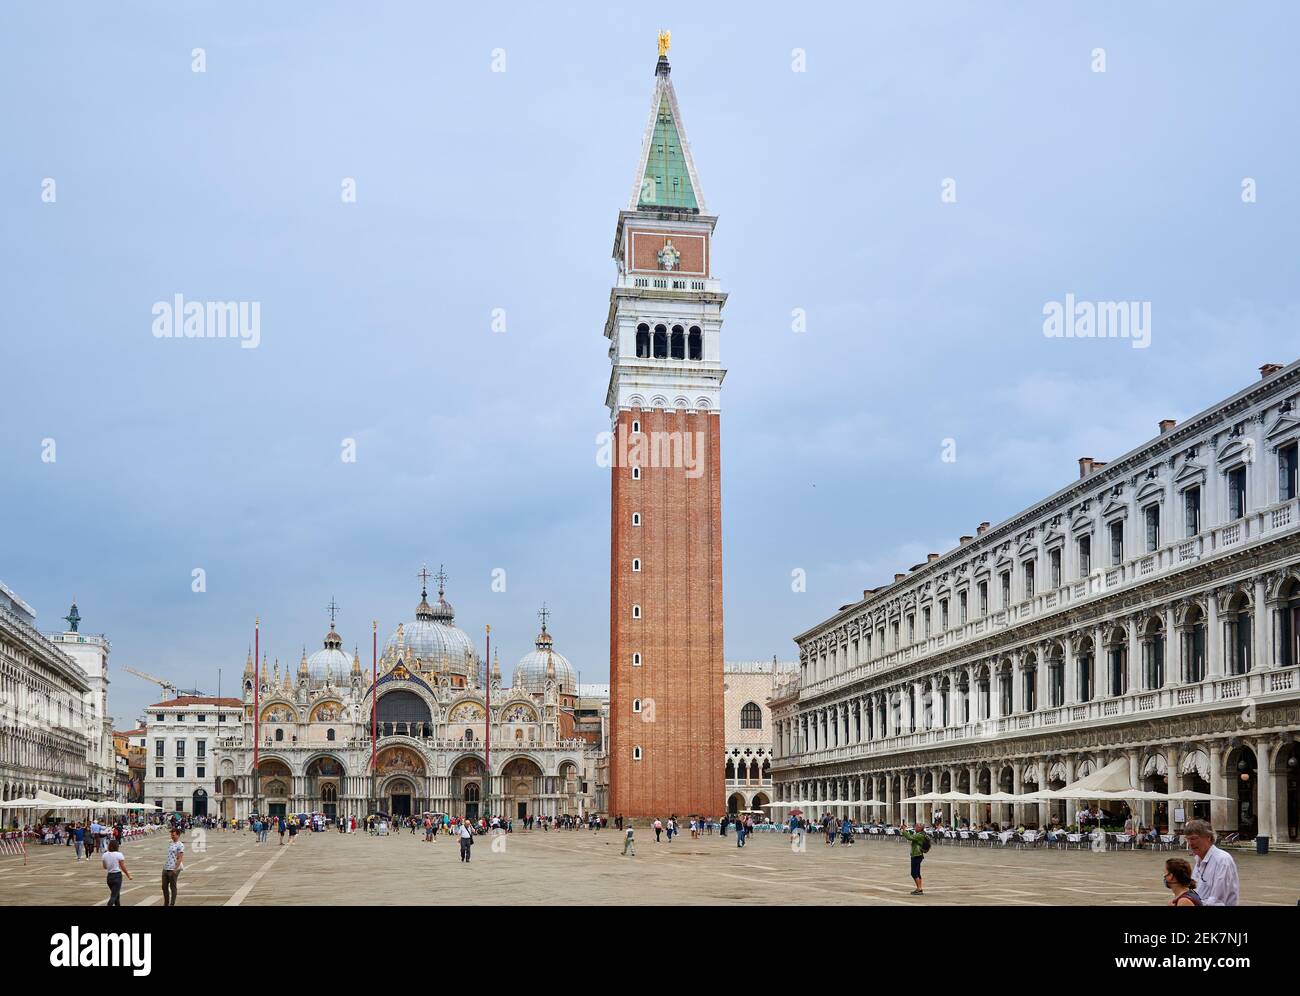 Piazza San Marco or St Mark's Square with St Mark's Basilica or Basilica di San Marco, Venice, Veneto, Italy Stock Photo